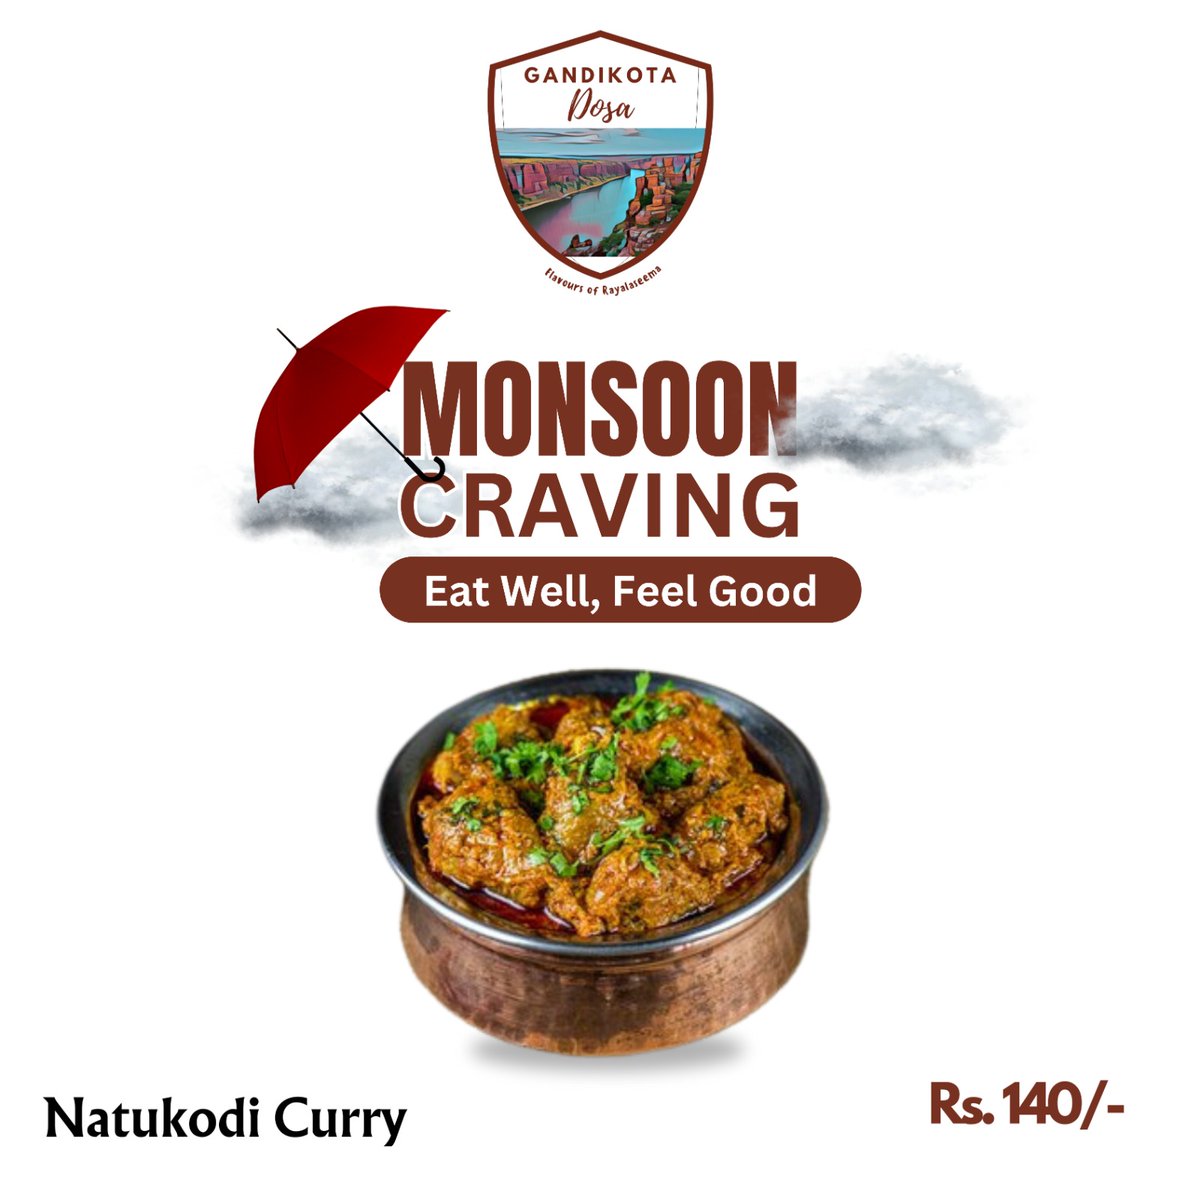 🌧️ Monsoon Magic: Indulge in the Irresistible Natukodi Curry at Gandikota Dosa! ☔🍲

Rainy days are made better with comforting, flavorful food. And what's better than a steaming bowl of Natukodi Curry from Gandikota Dosa
#GandikotaDosa #MonsoonCravings #NatukodiCurry #Comfort